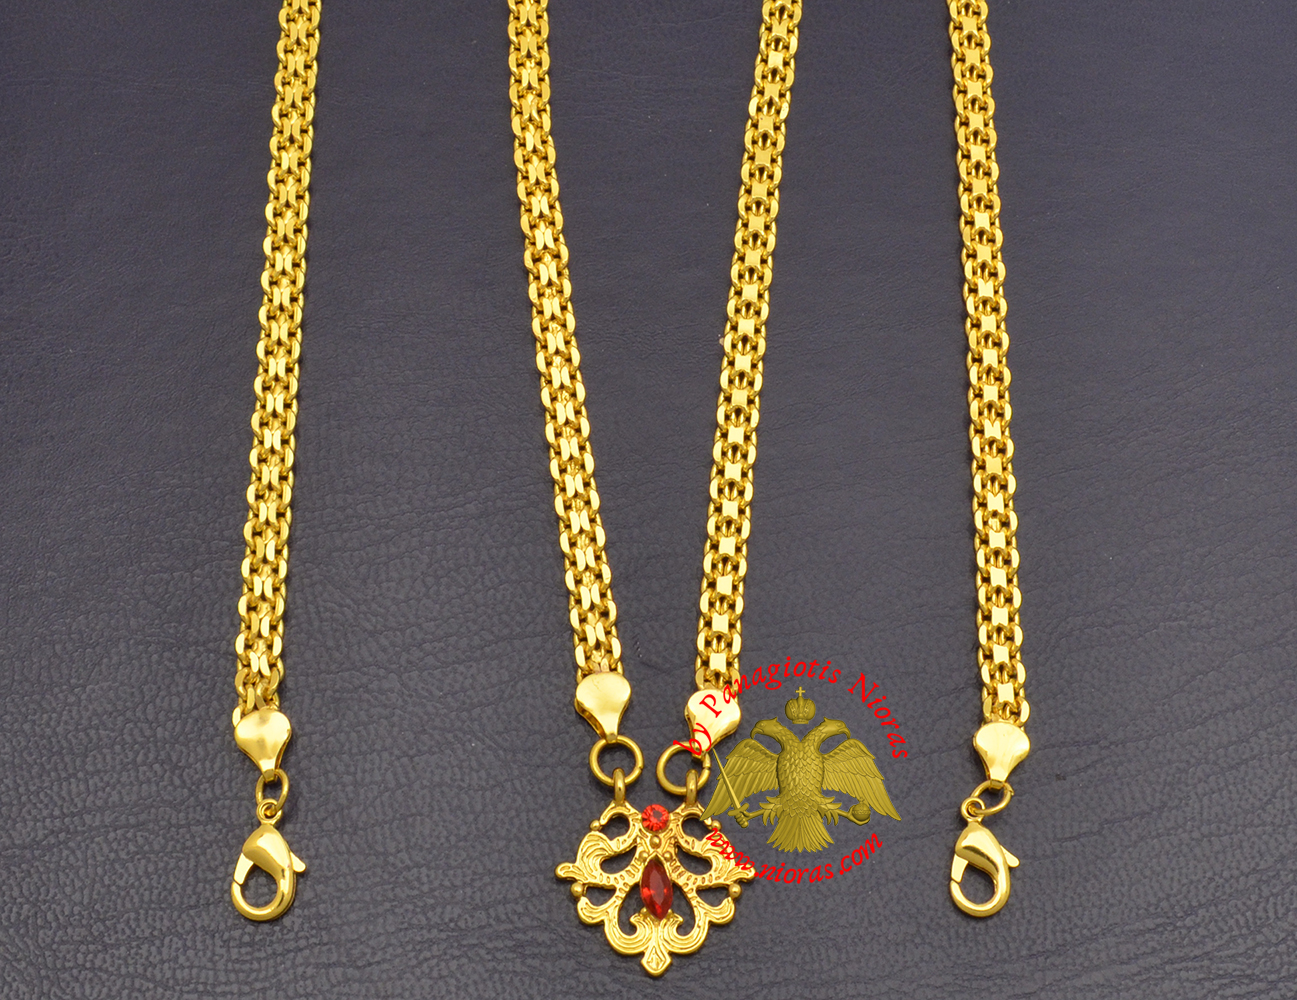 Metal Chain for Orthodox Engolpion or Pectoral Cross Gold Plated 120 cm D'